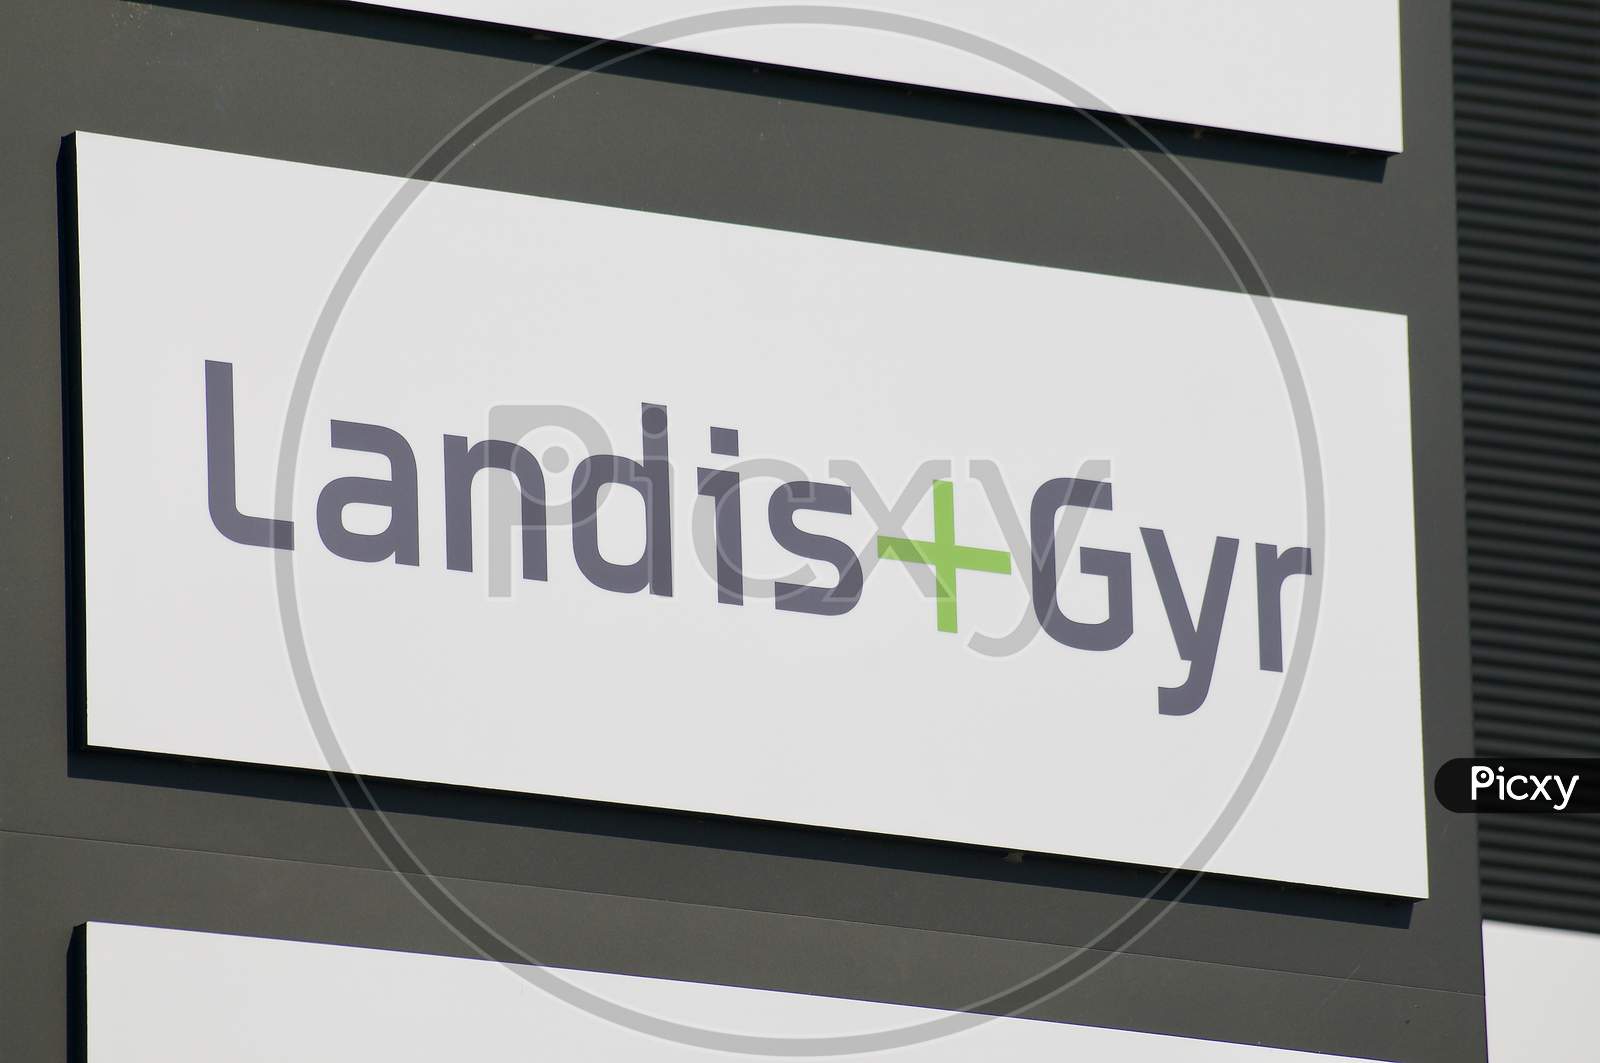 Landis + Gyr Sign Hanging In Front Of The Headquarters Building In Zug